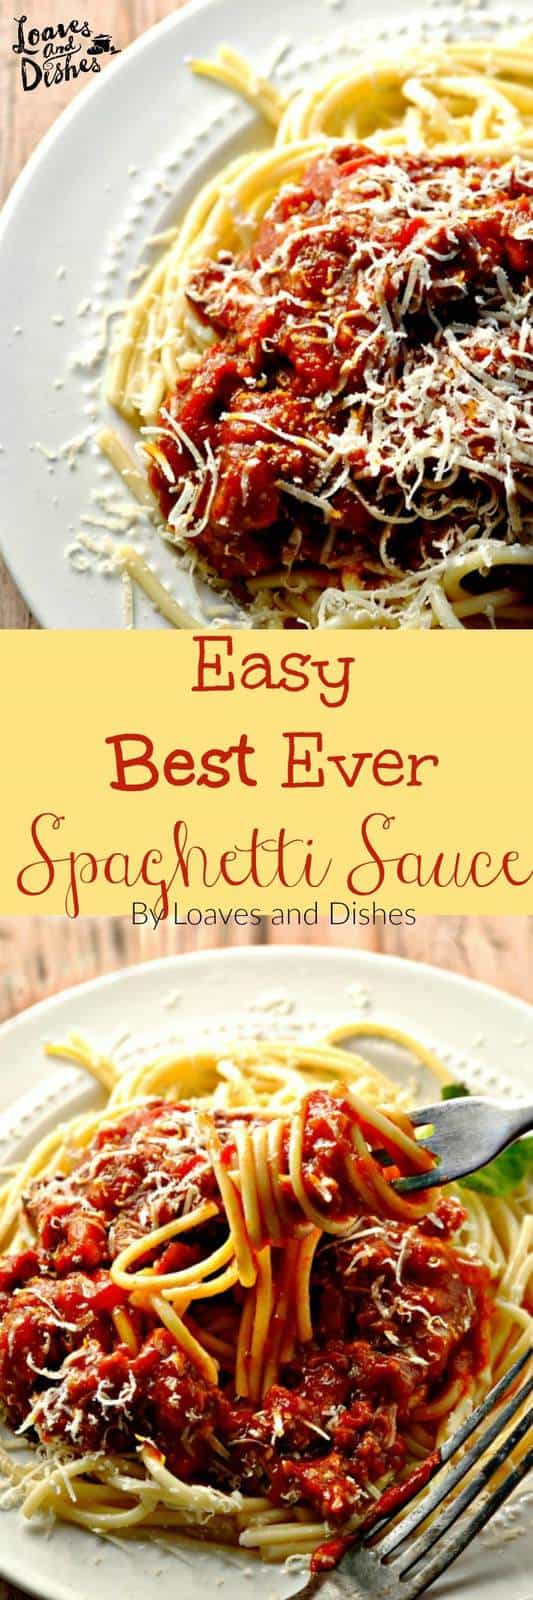 Easy Best Ever Spaghetti Sauce is so delicious and easy to make from scratch! You might not ever want canned sauce again! Take a minute and make this sauce from scratch! Easy homemade Spaghetti Sauce